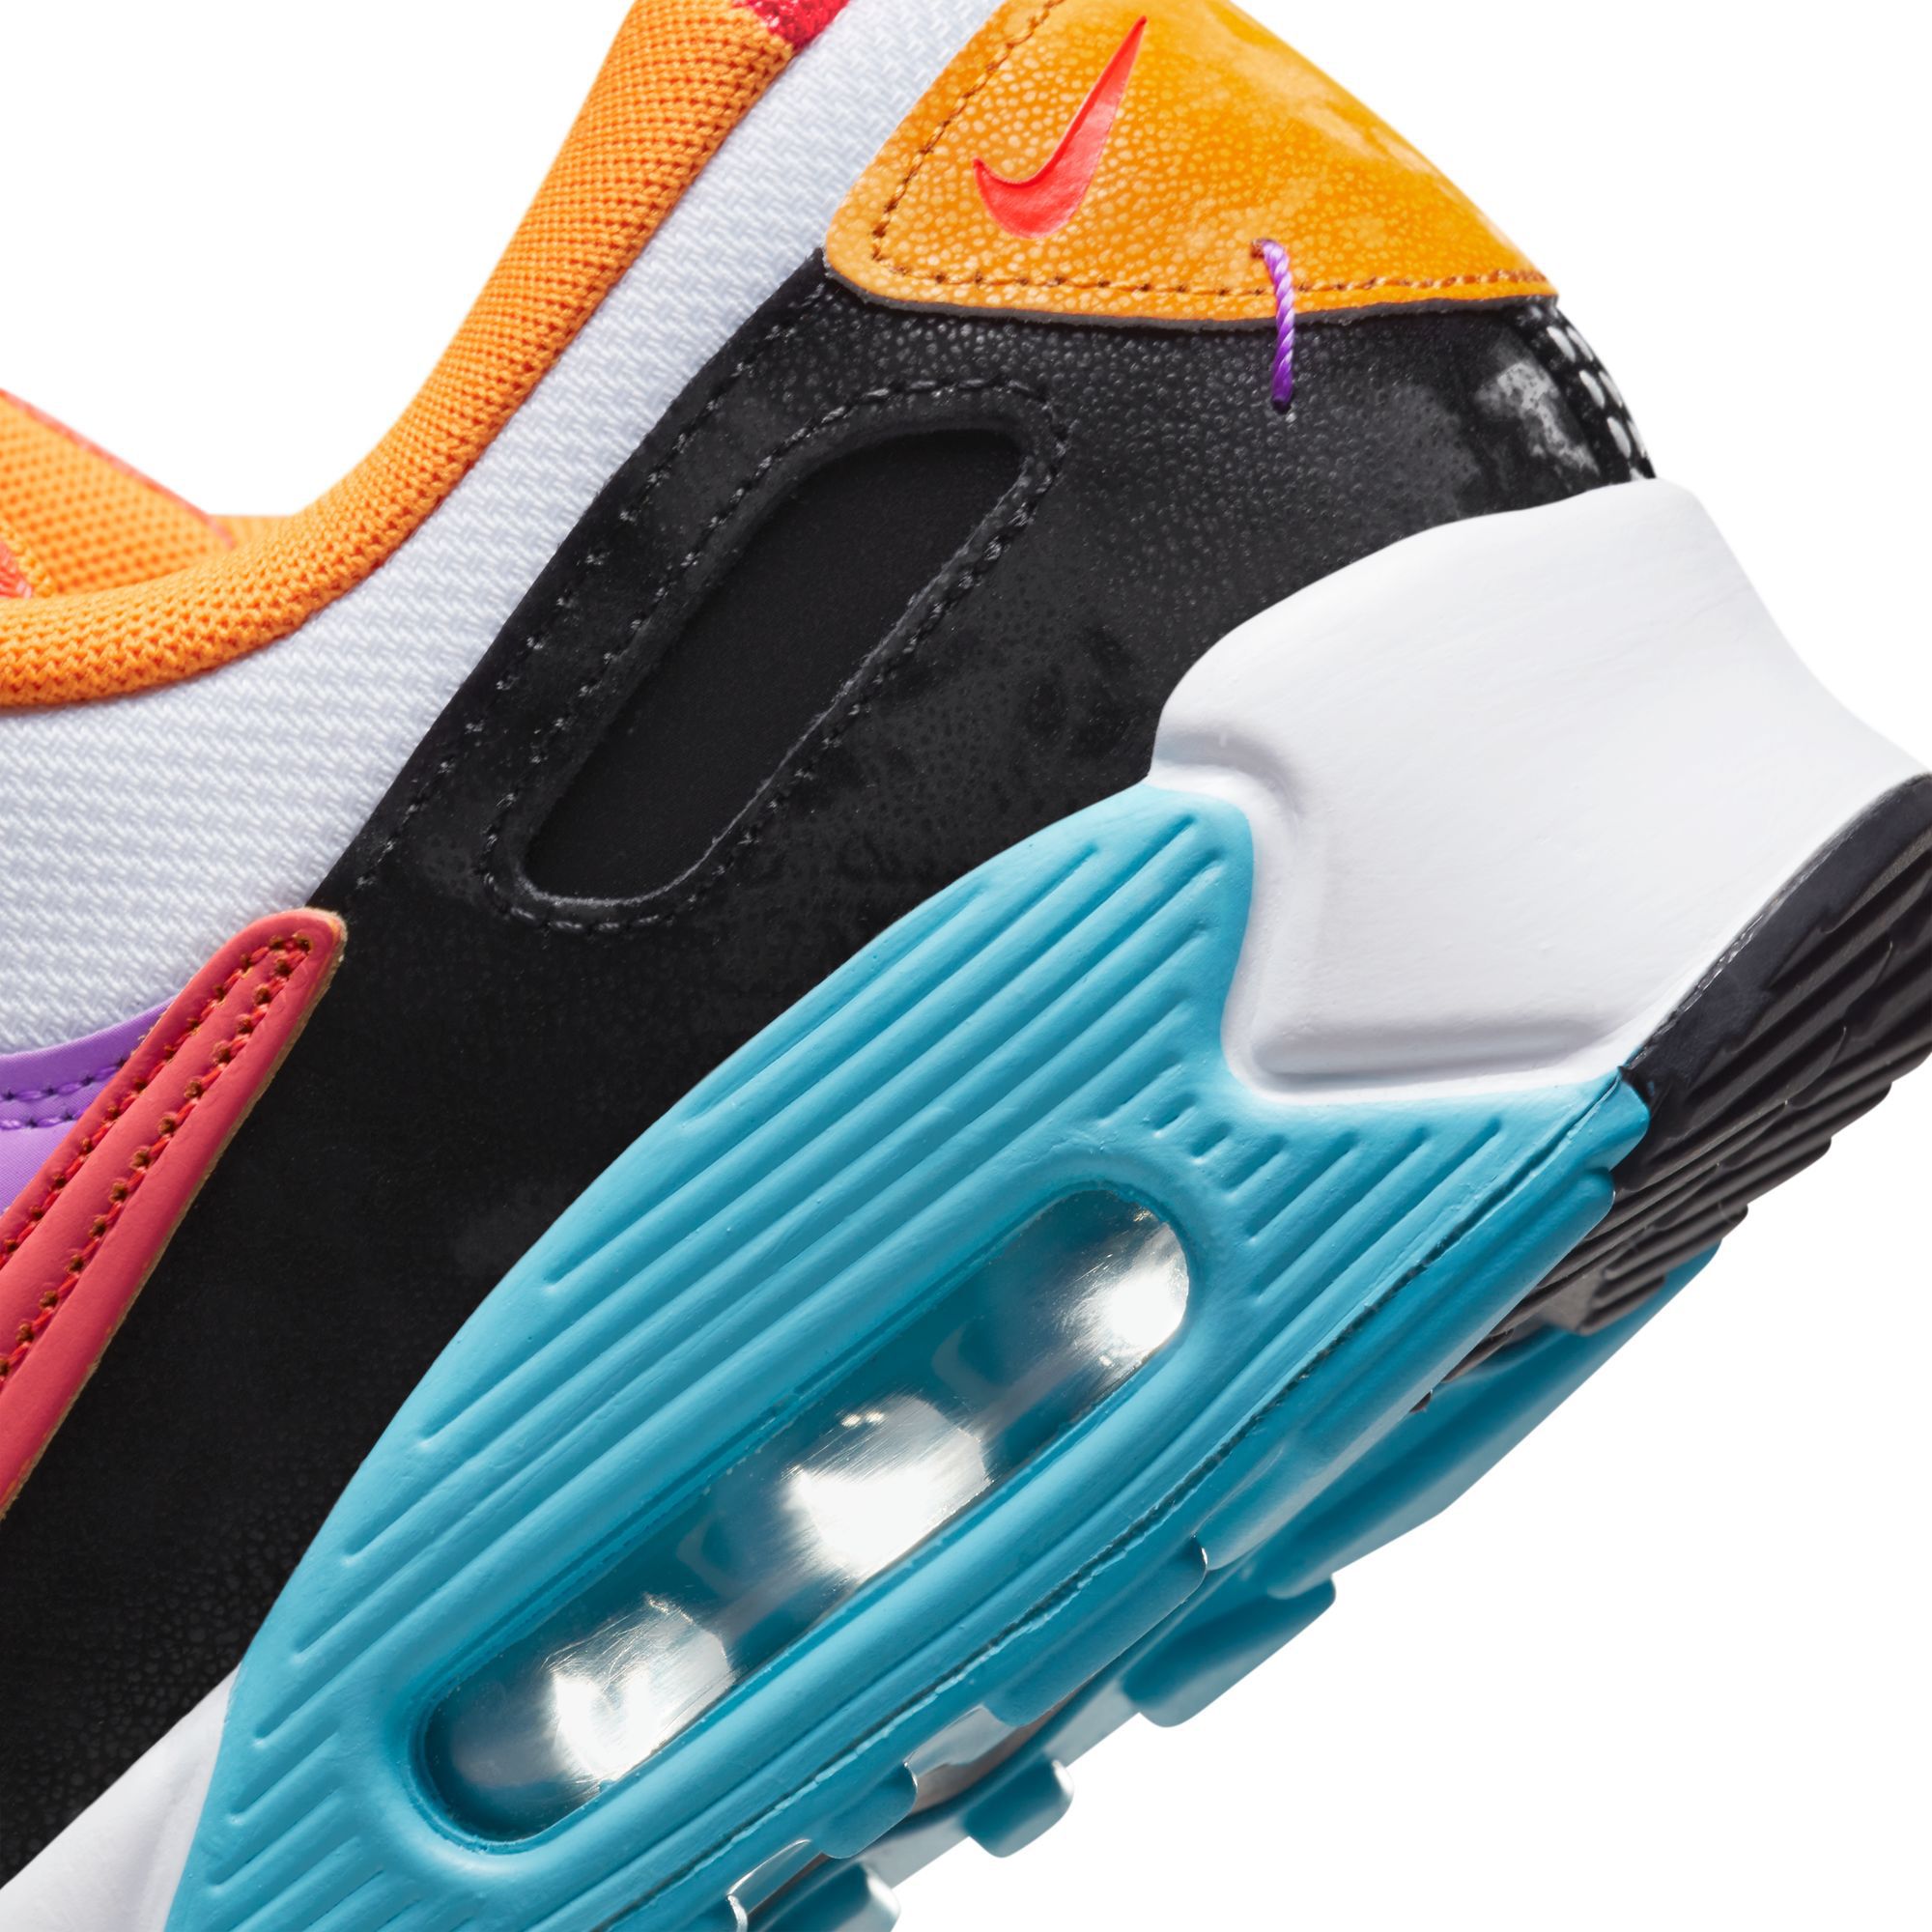 Nike Pink And Orange Air Max 90 Sneakers With Layered Design And